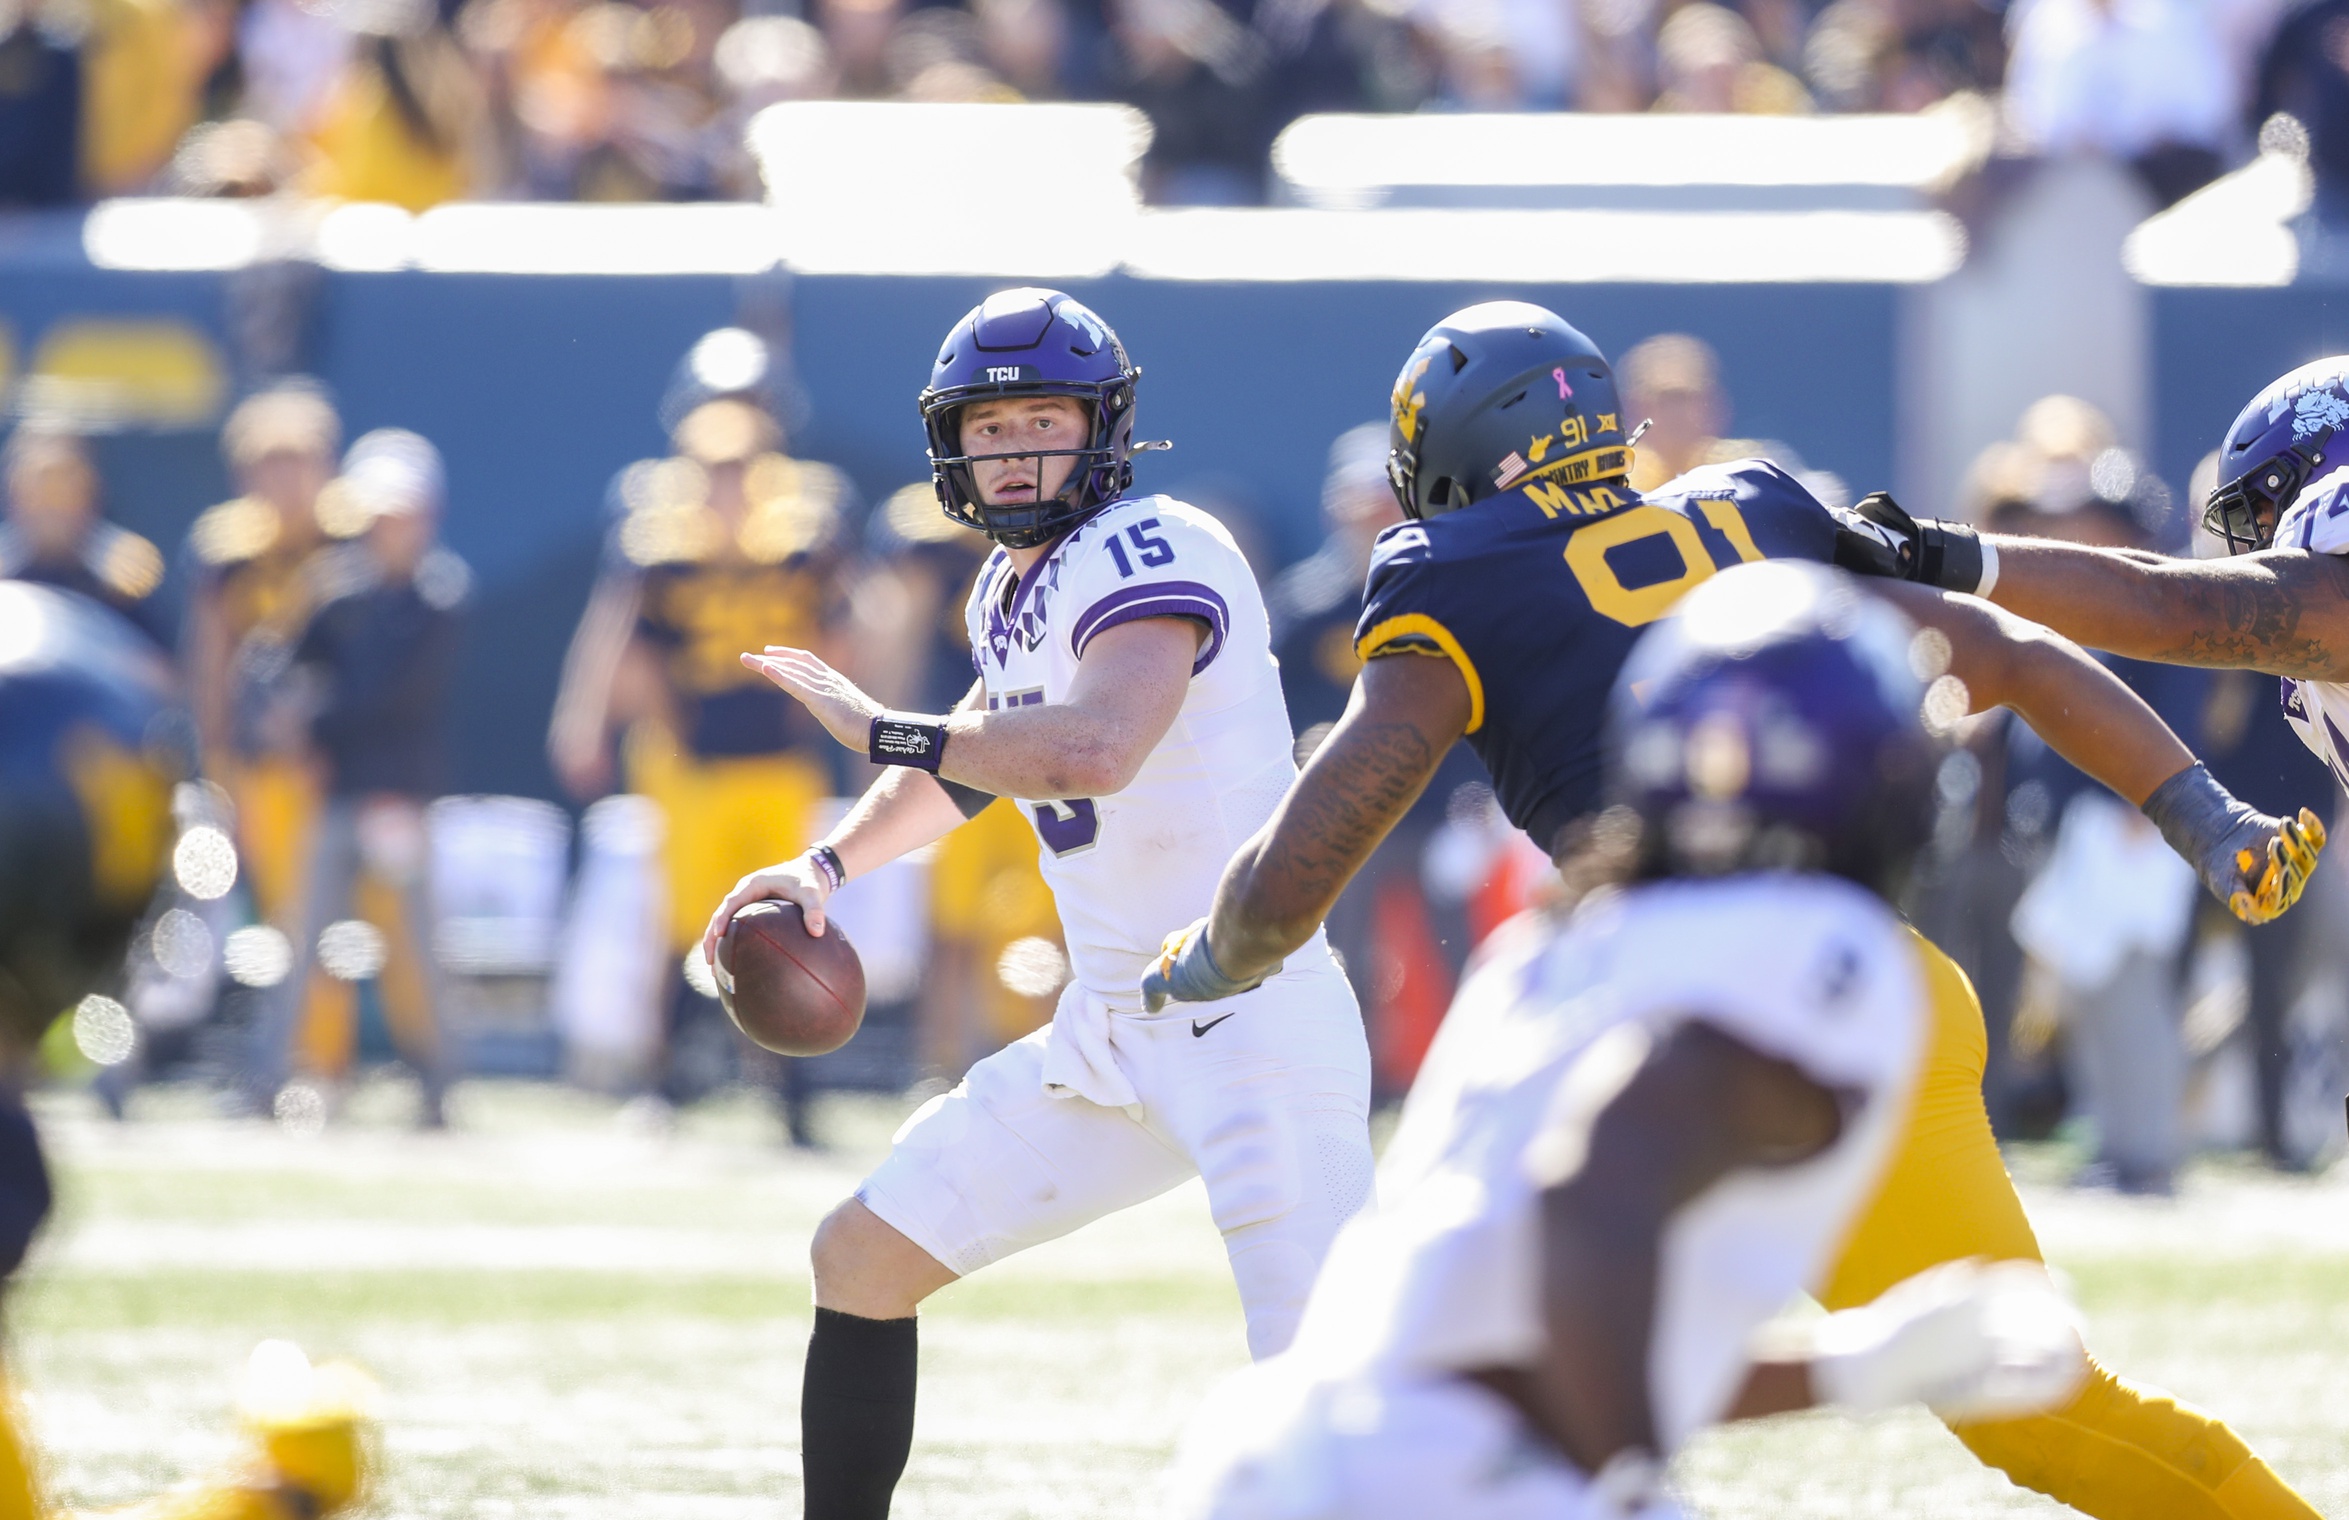 TCU Horned Frogs quarterback Max Duggan (15) rolls out to pass during the second quarter against the West Virginia Mountaineers at Mountaineer Field at Milan Puskar Stadium